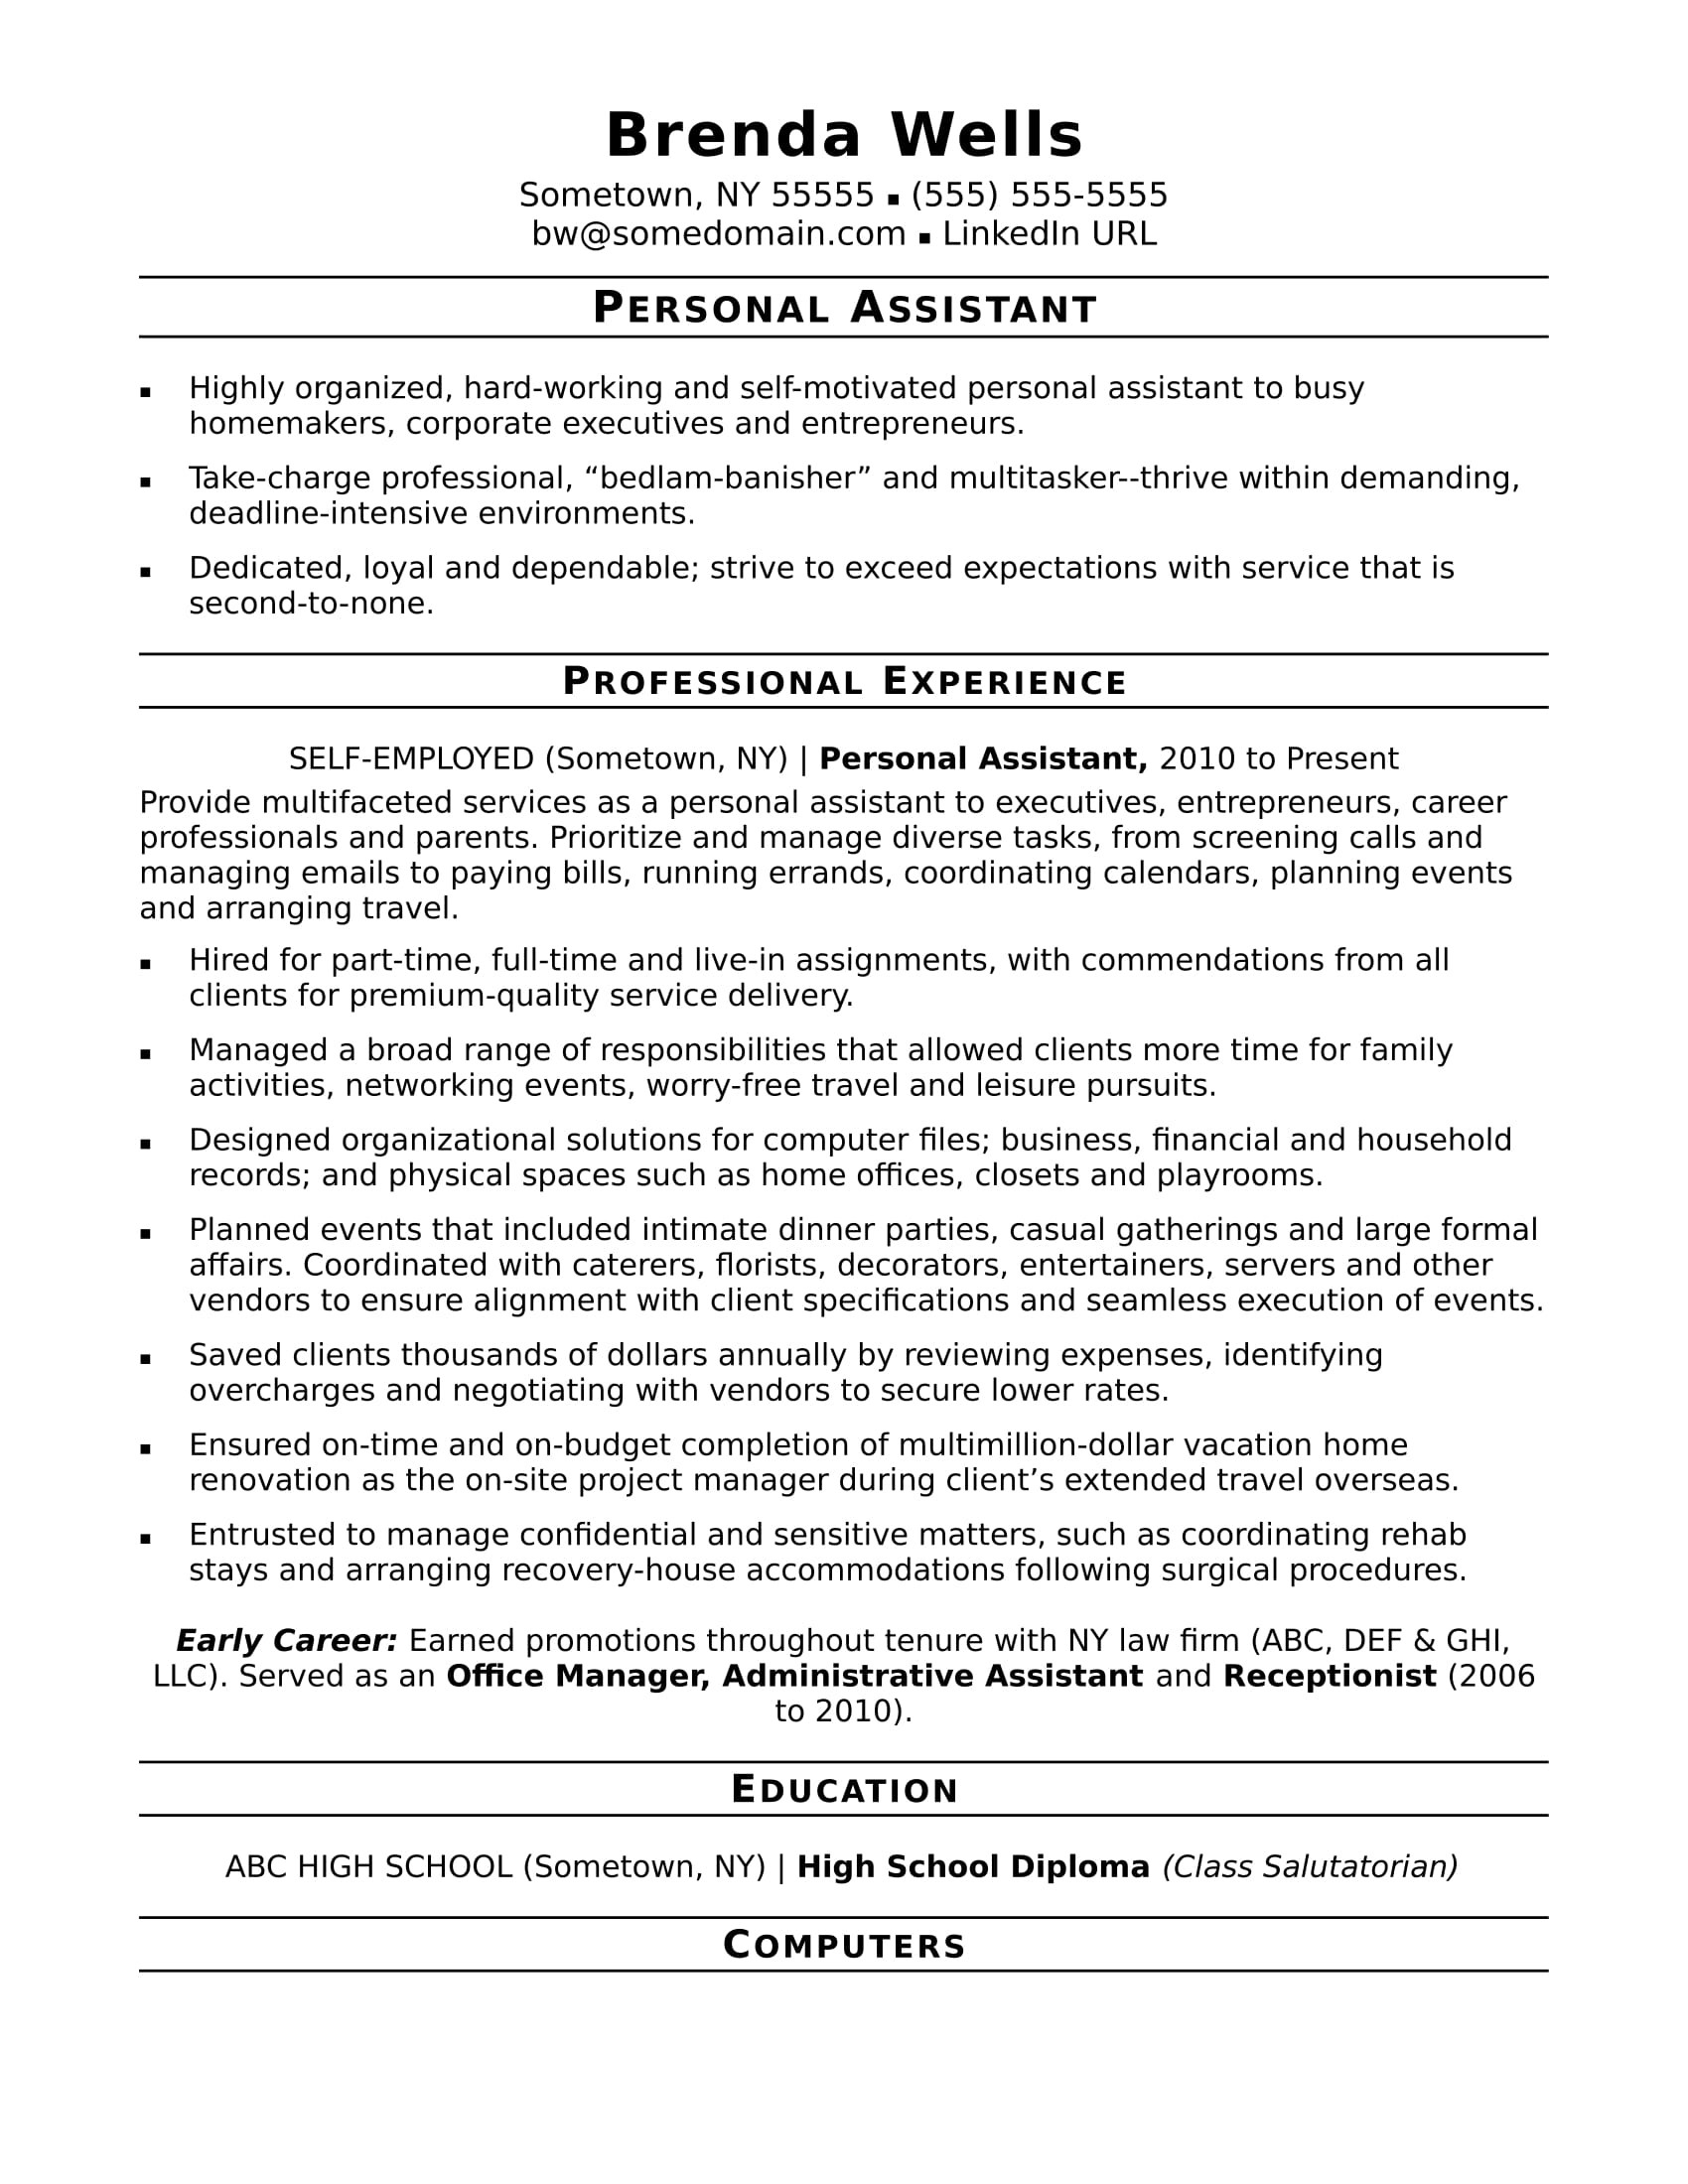 Sample Resumes for Low Income Jobs Personal assistant Resume Monster.com